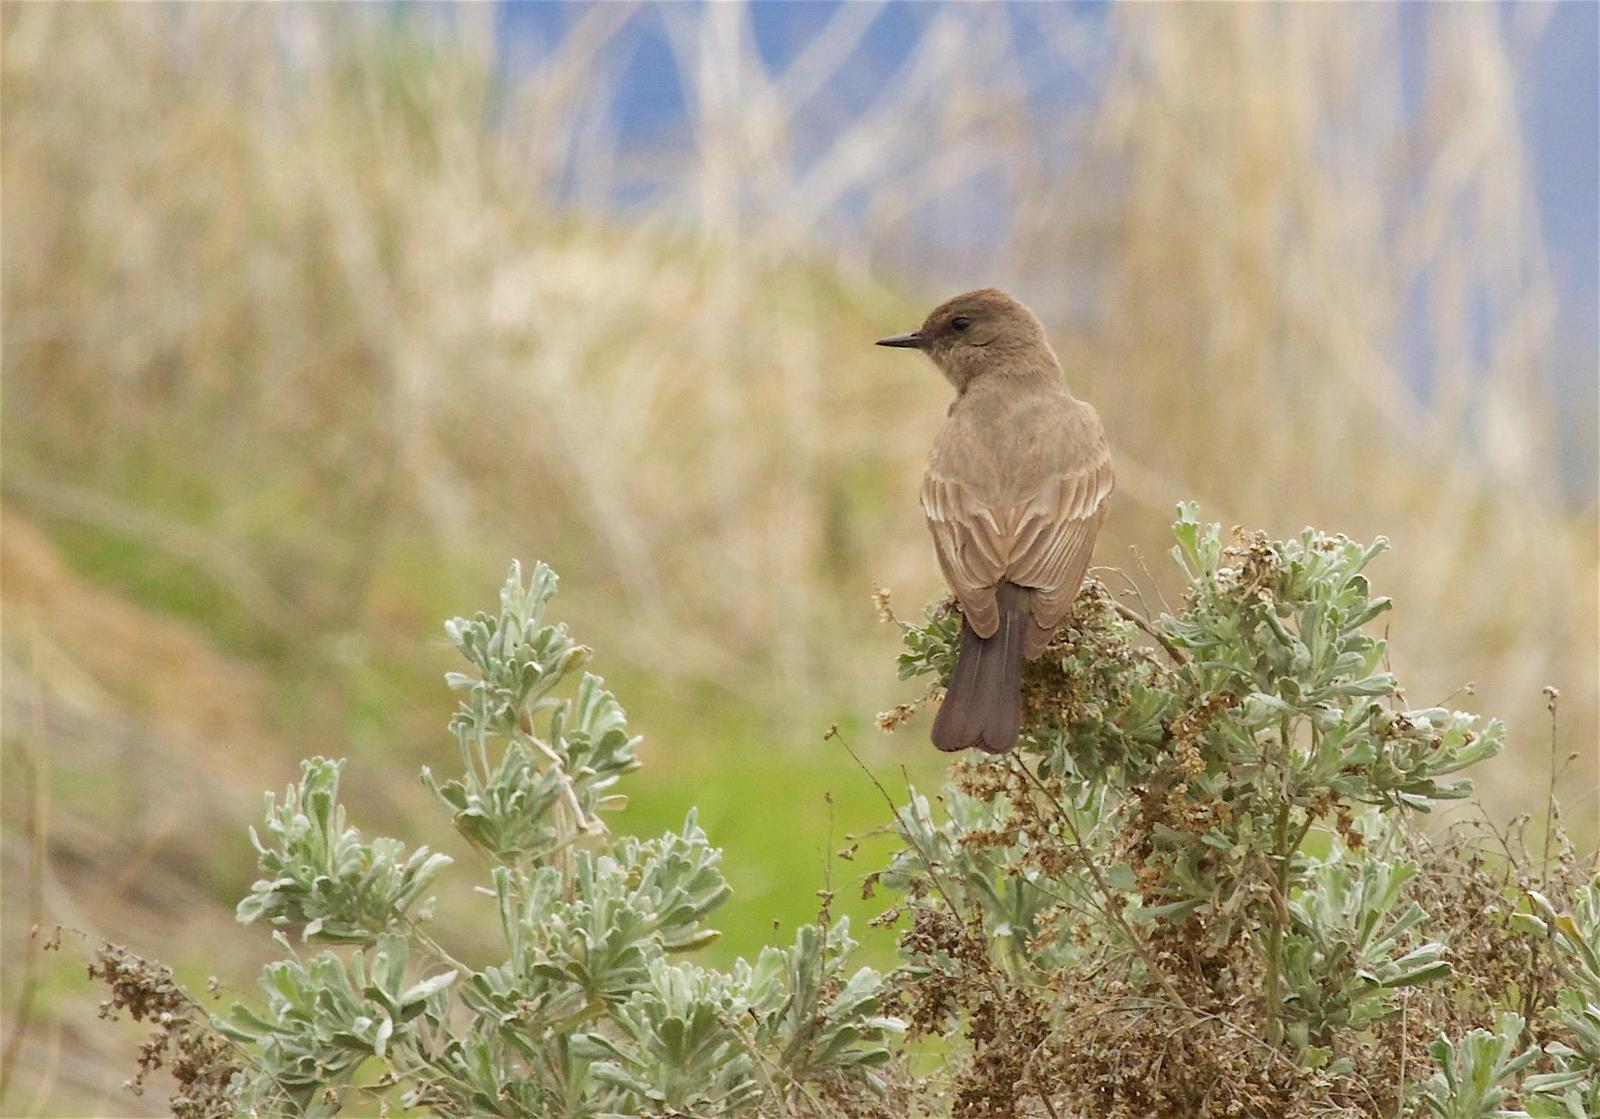 Say's Phoebe Photo by Kathryn Keith